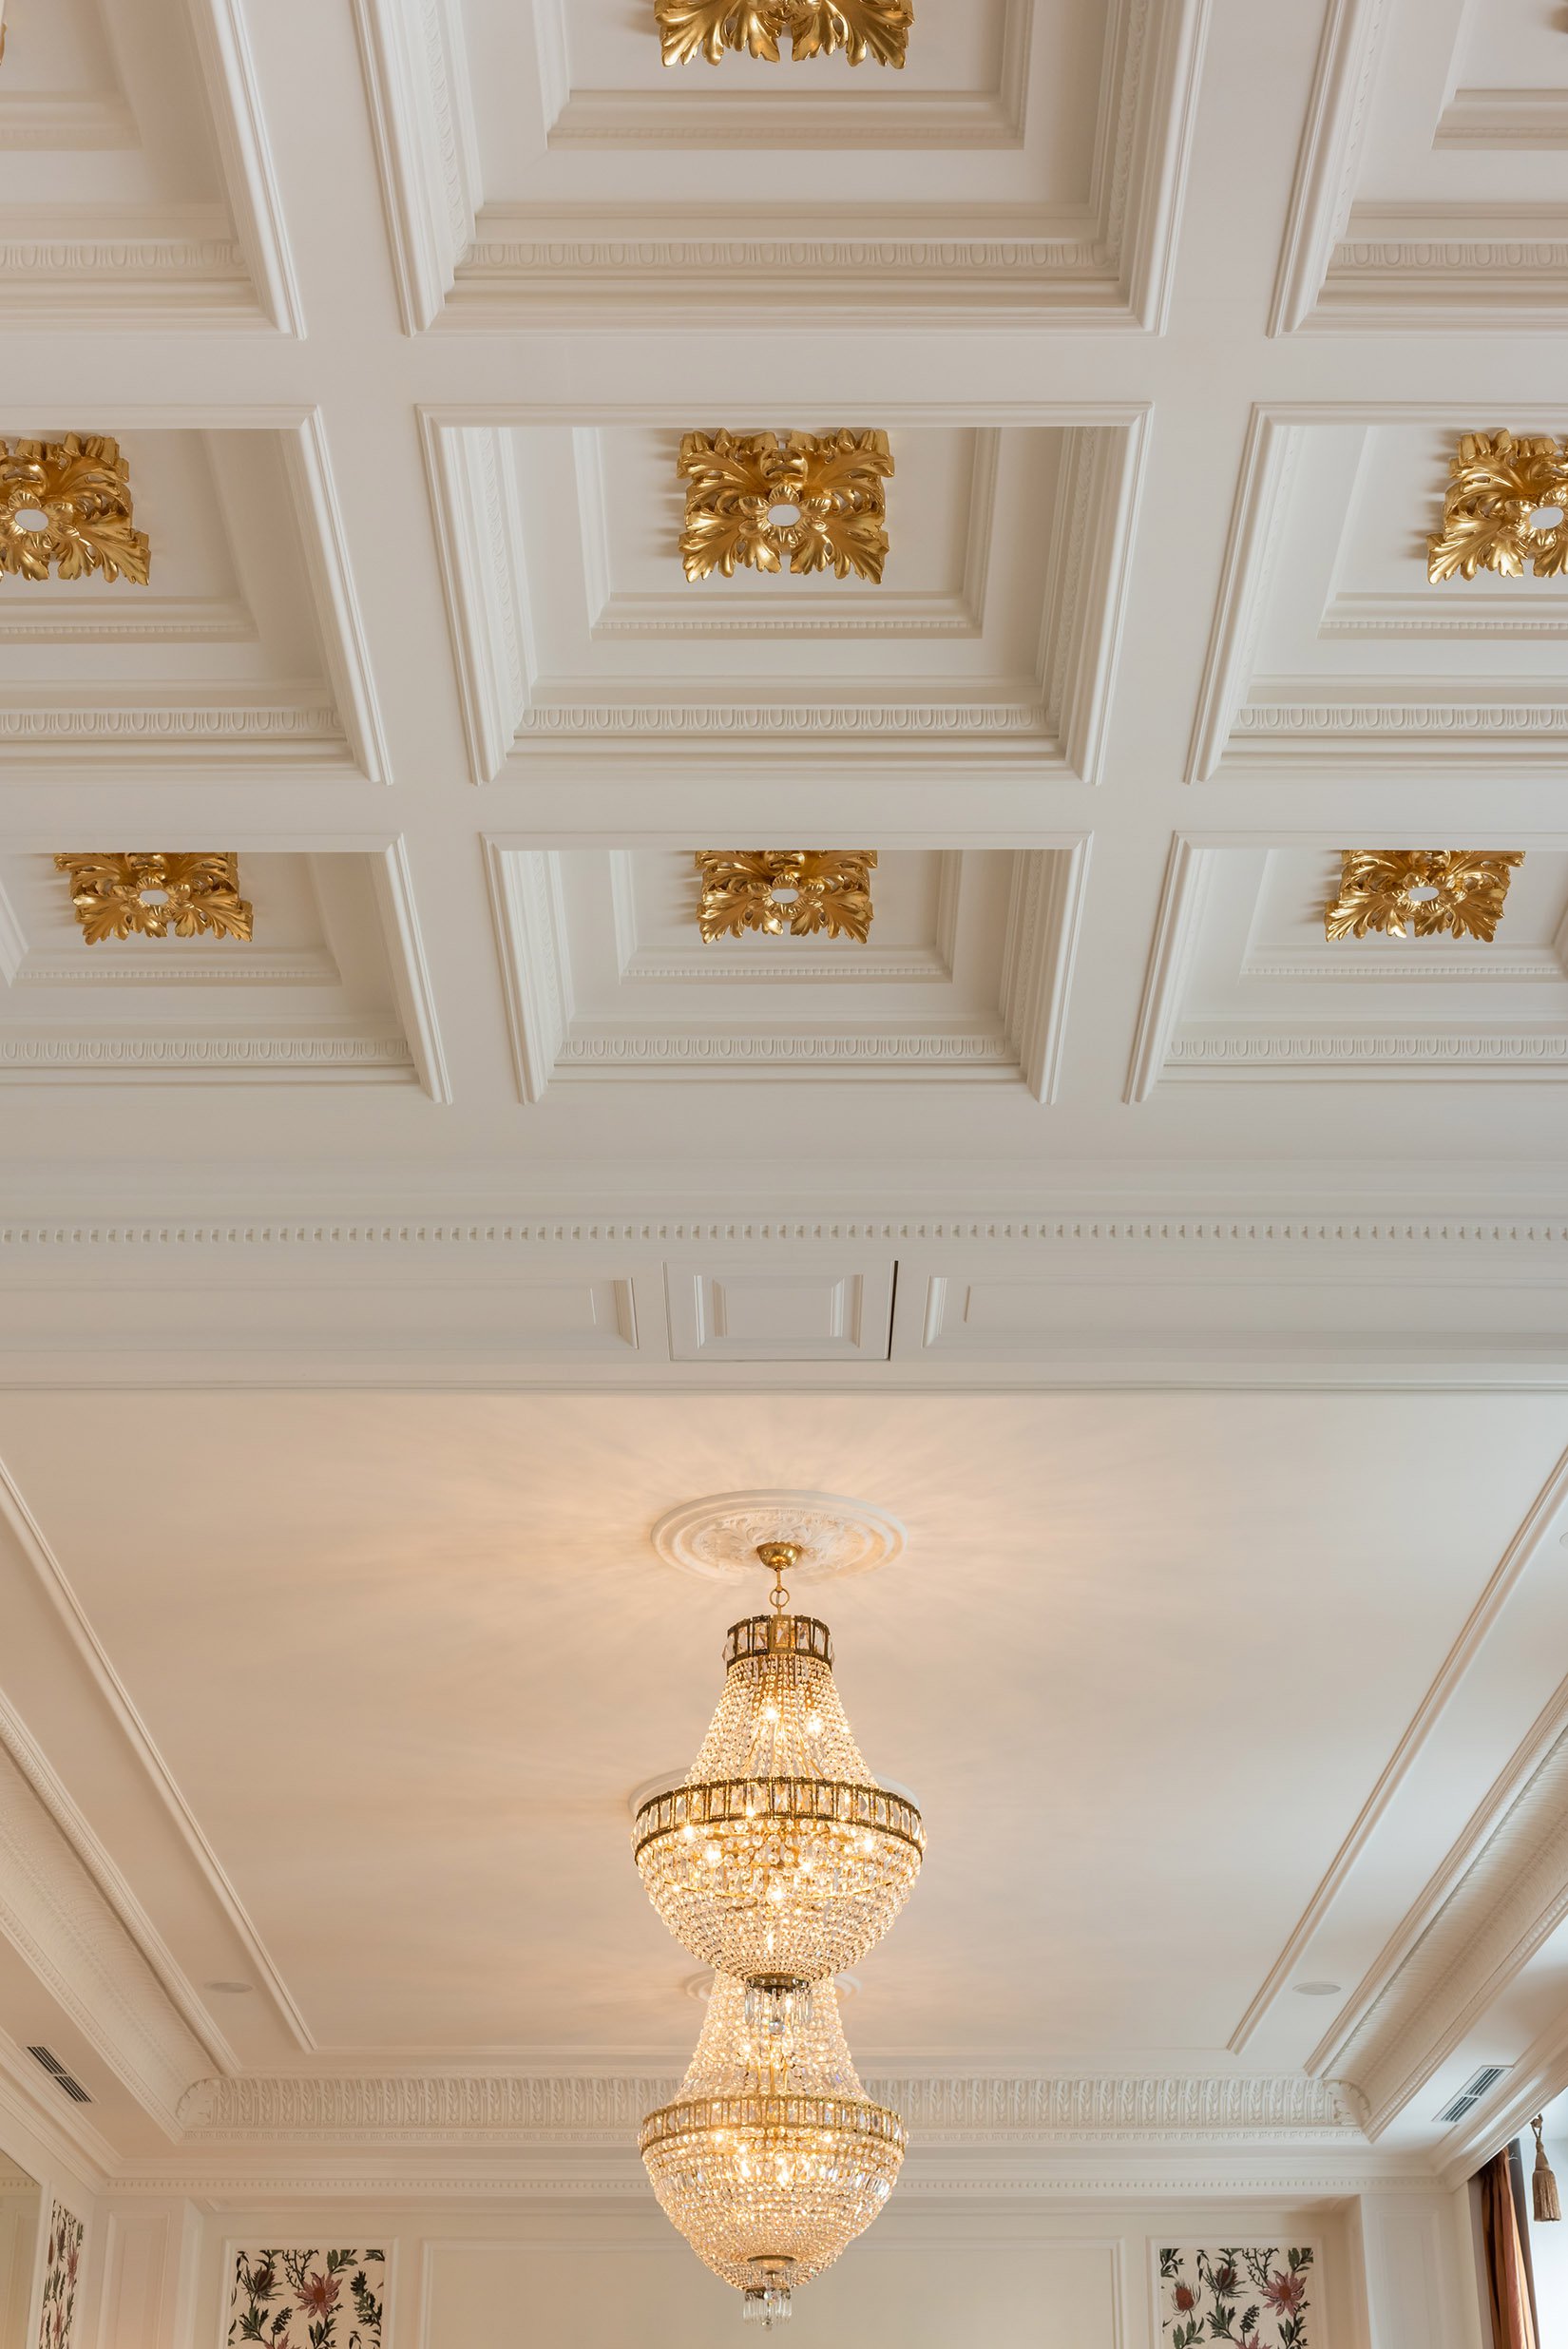 Conference room decorated ceiling photo Fryderyk Concert hall